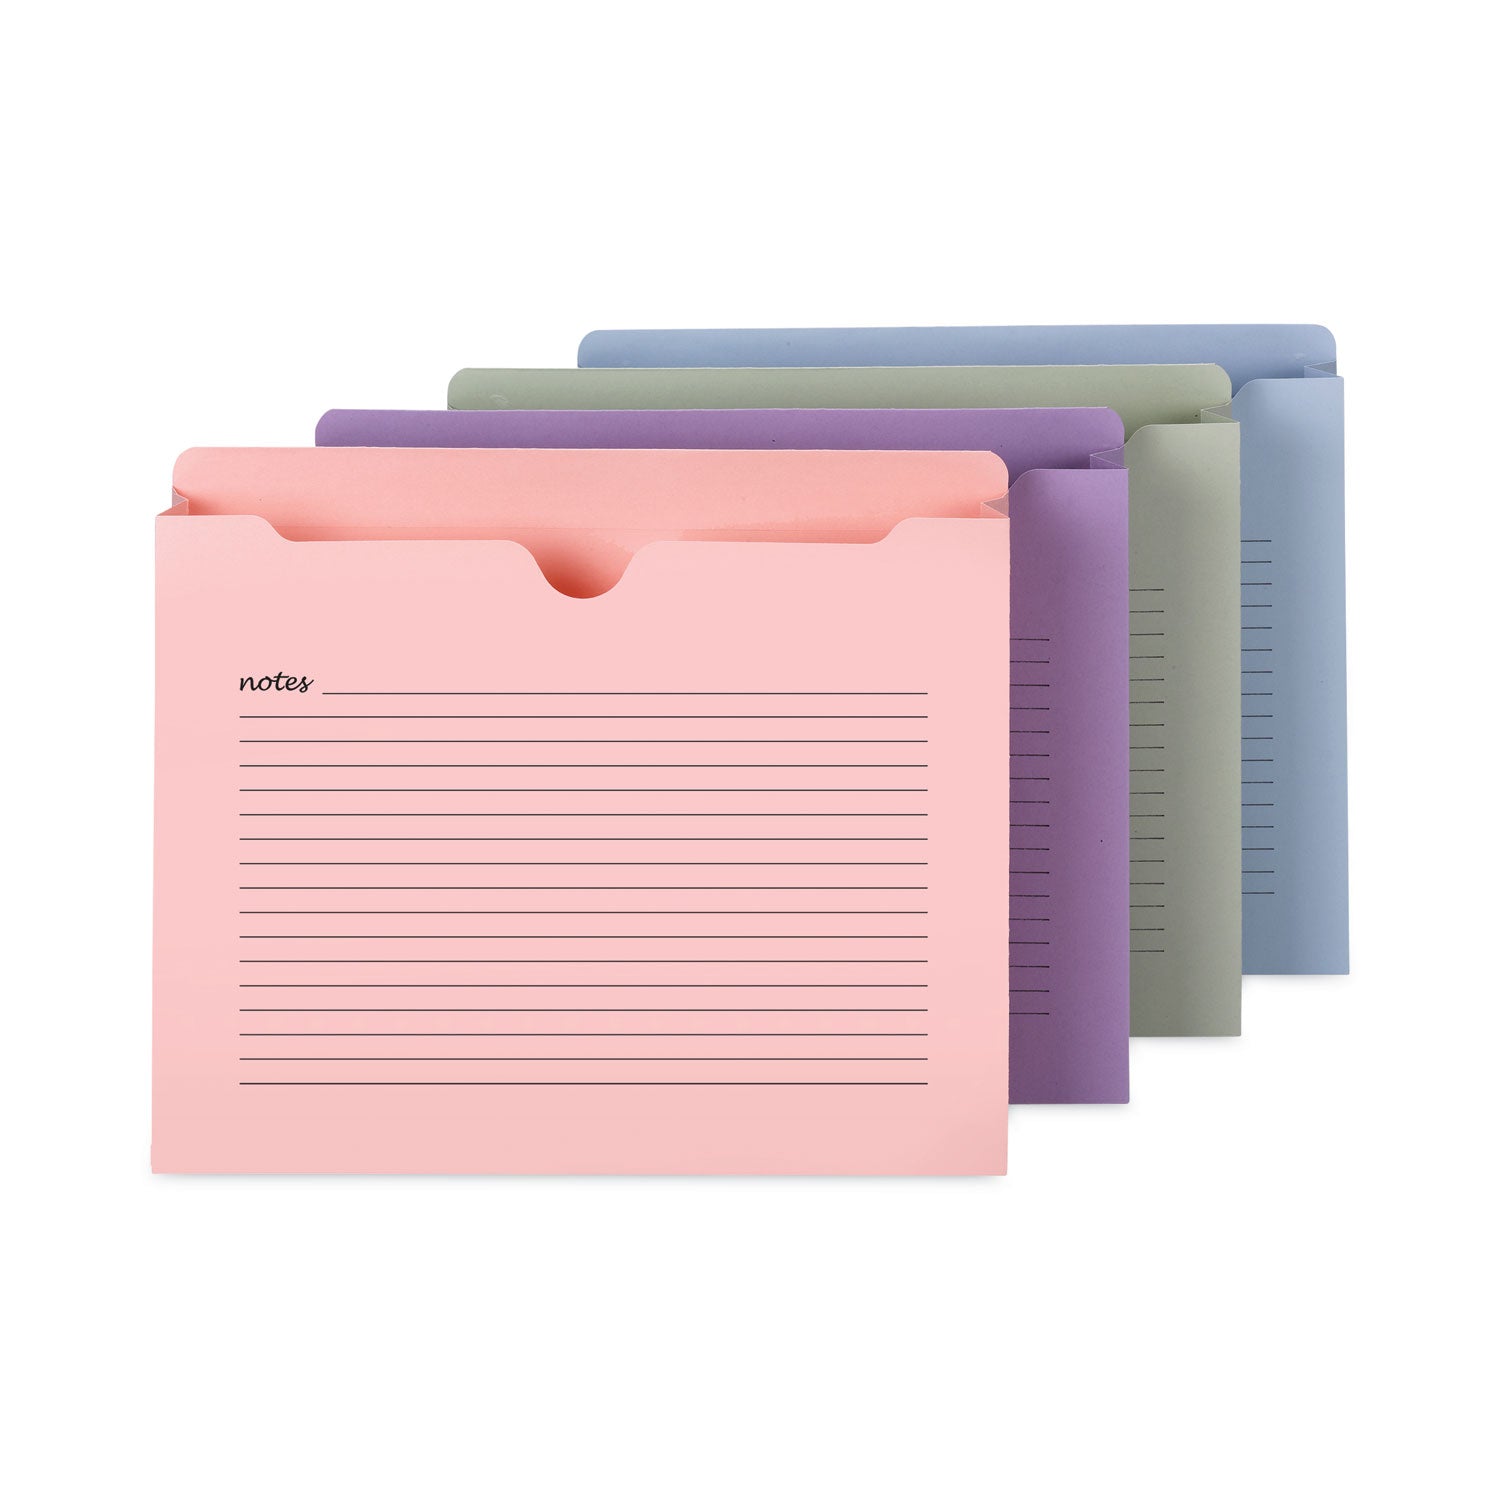 notes-file-jackets-straight-tab-2-expansion-letter-size-assorted-colors-12-pack_smd75695 - 1